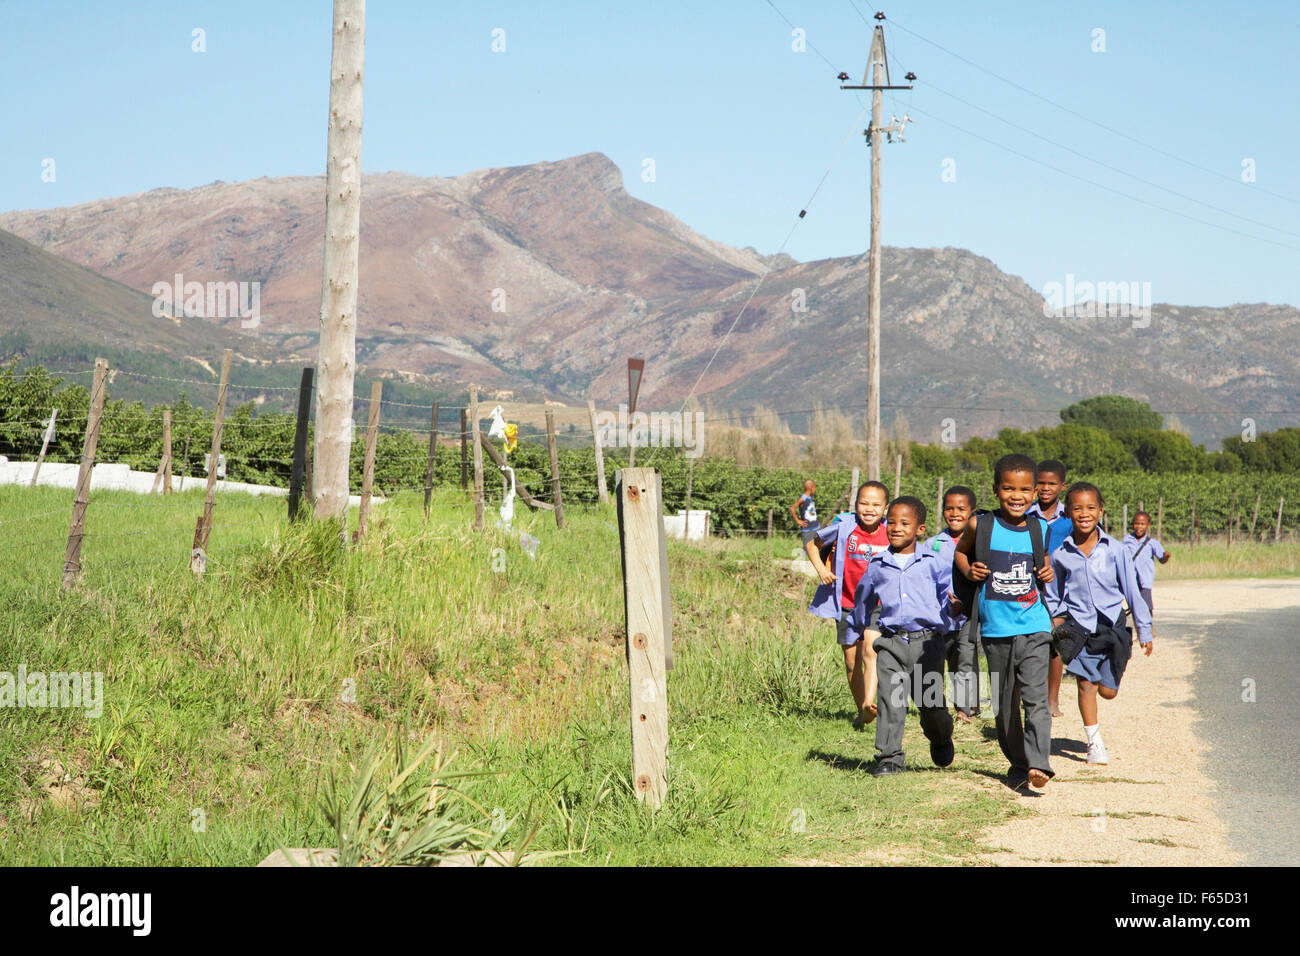 Happy African children running on roadside, South Africa Stock Photo